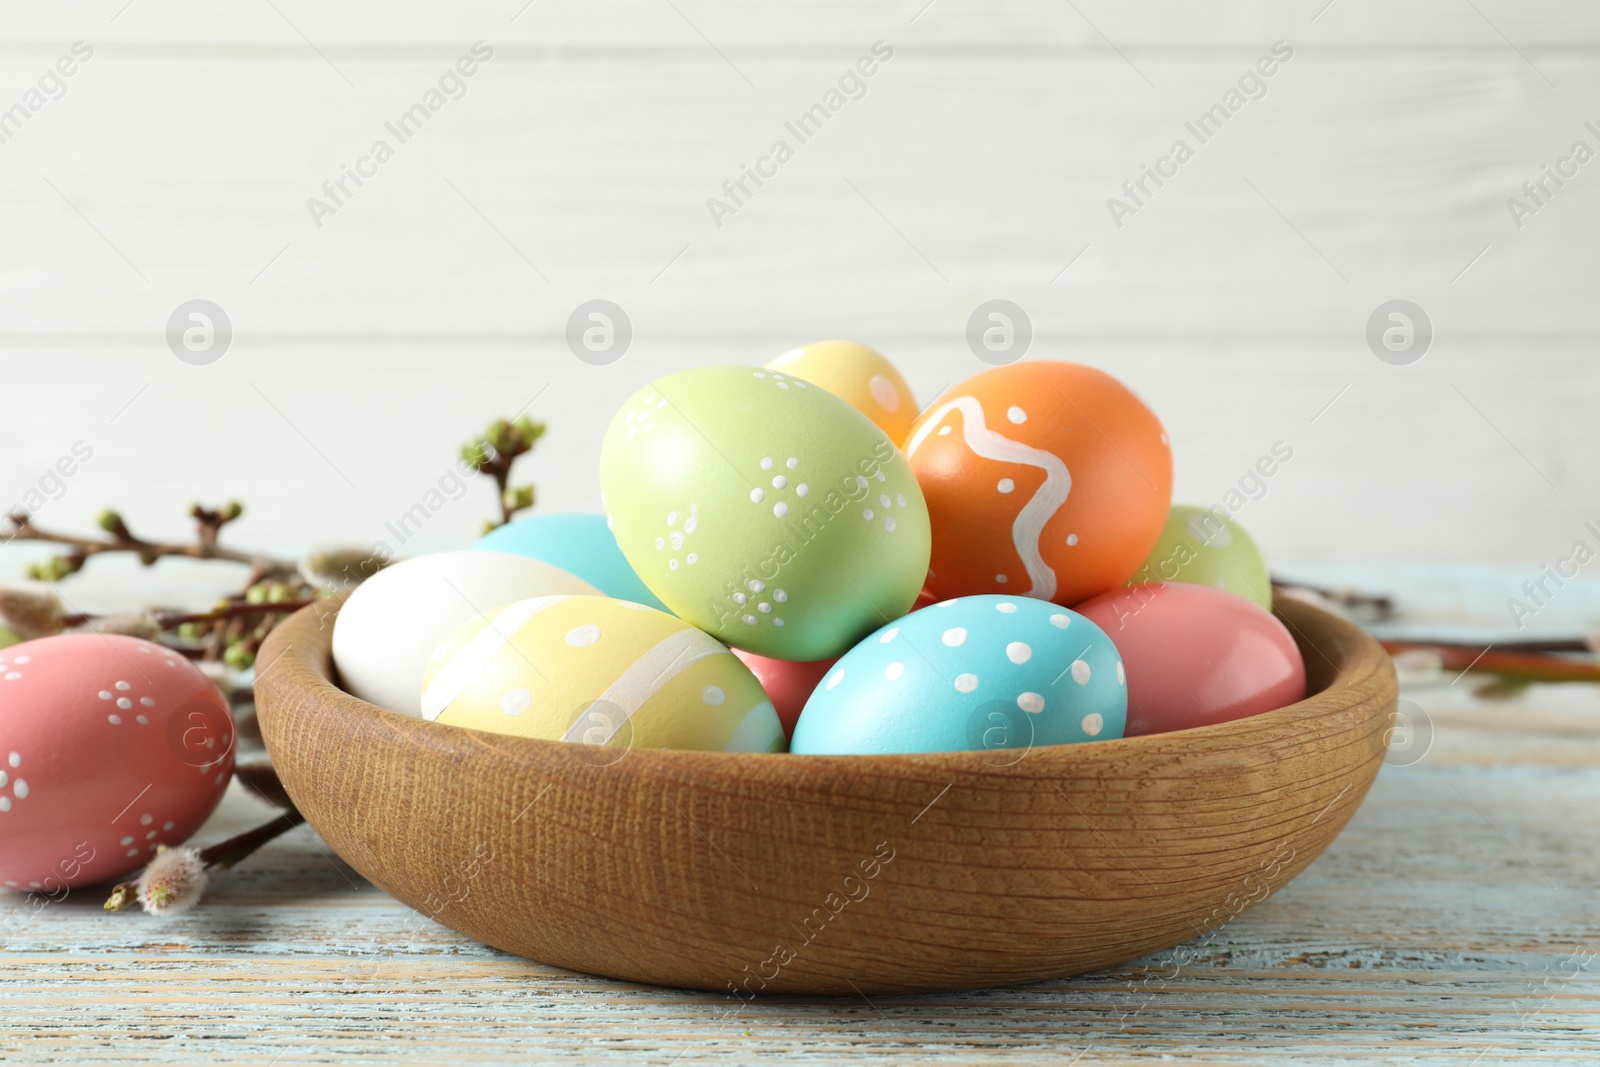 Photo of Plate with painted Easter eggs on table against wooden background